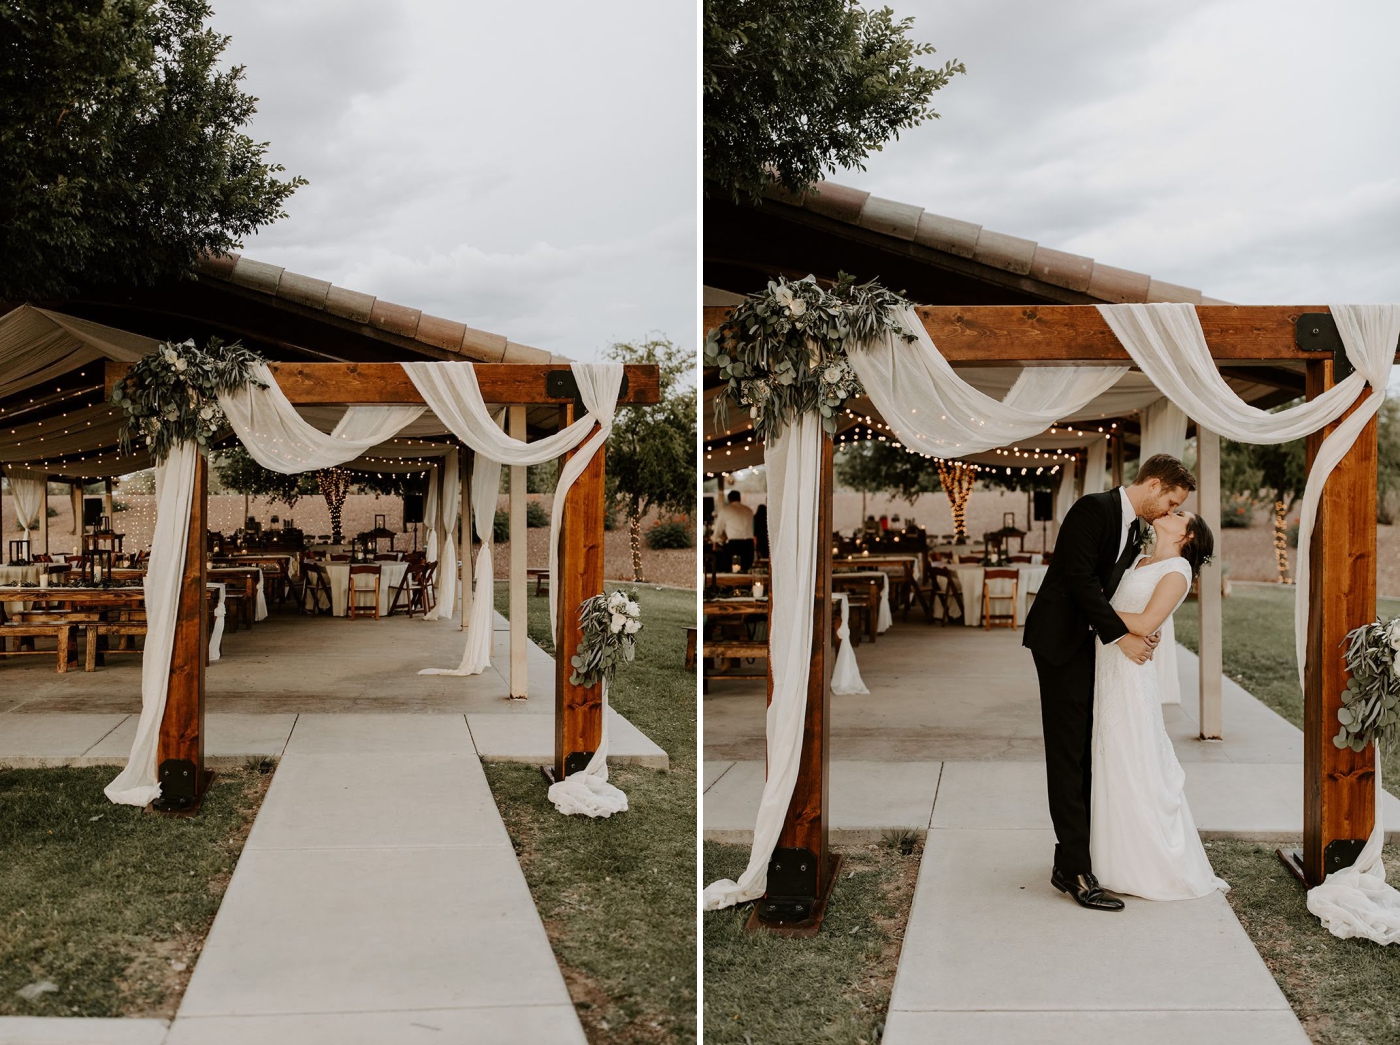 How to decorate a Wooden Beam Arch for your wedding ceremony